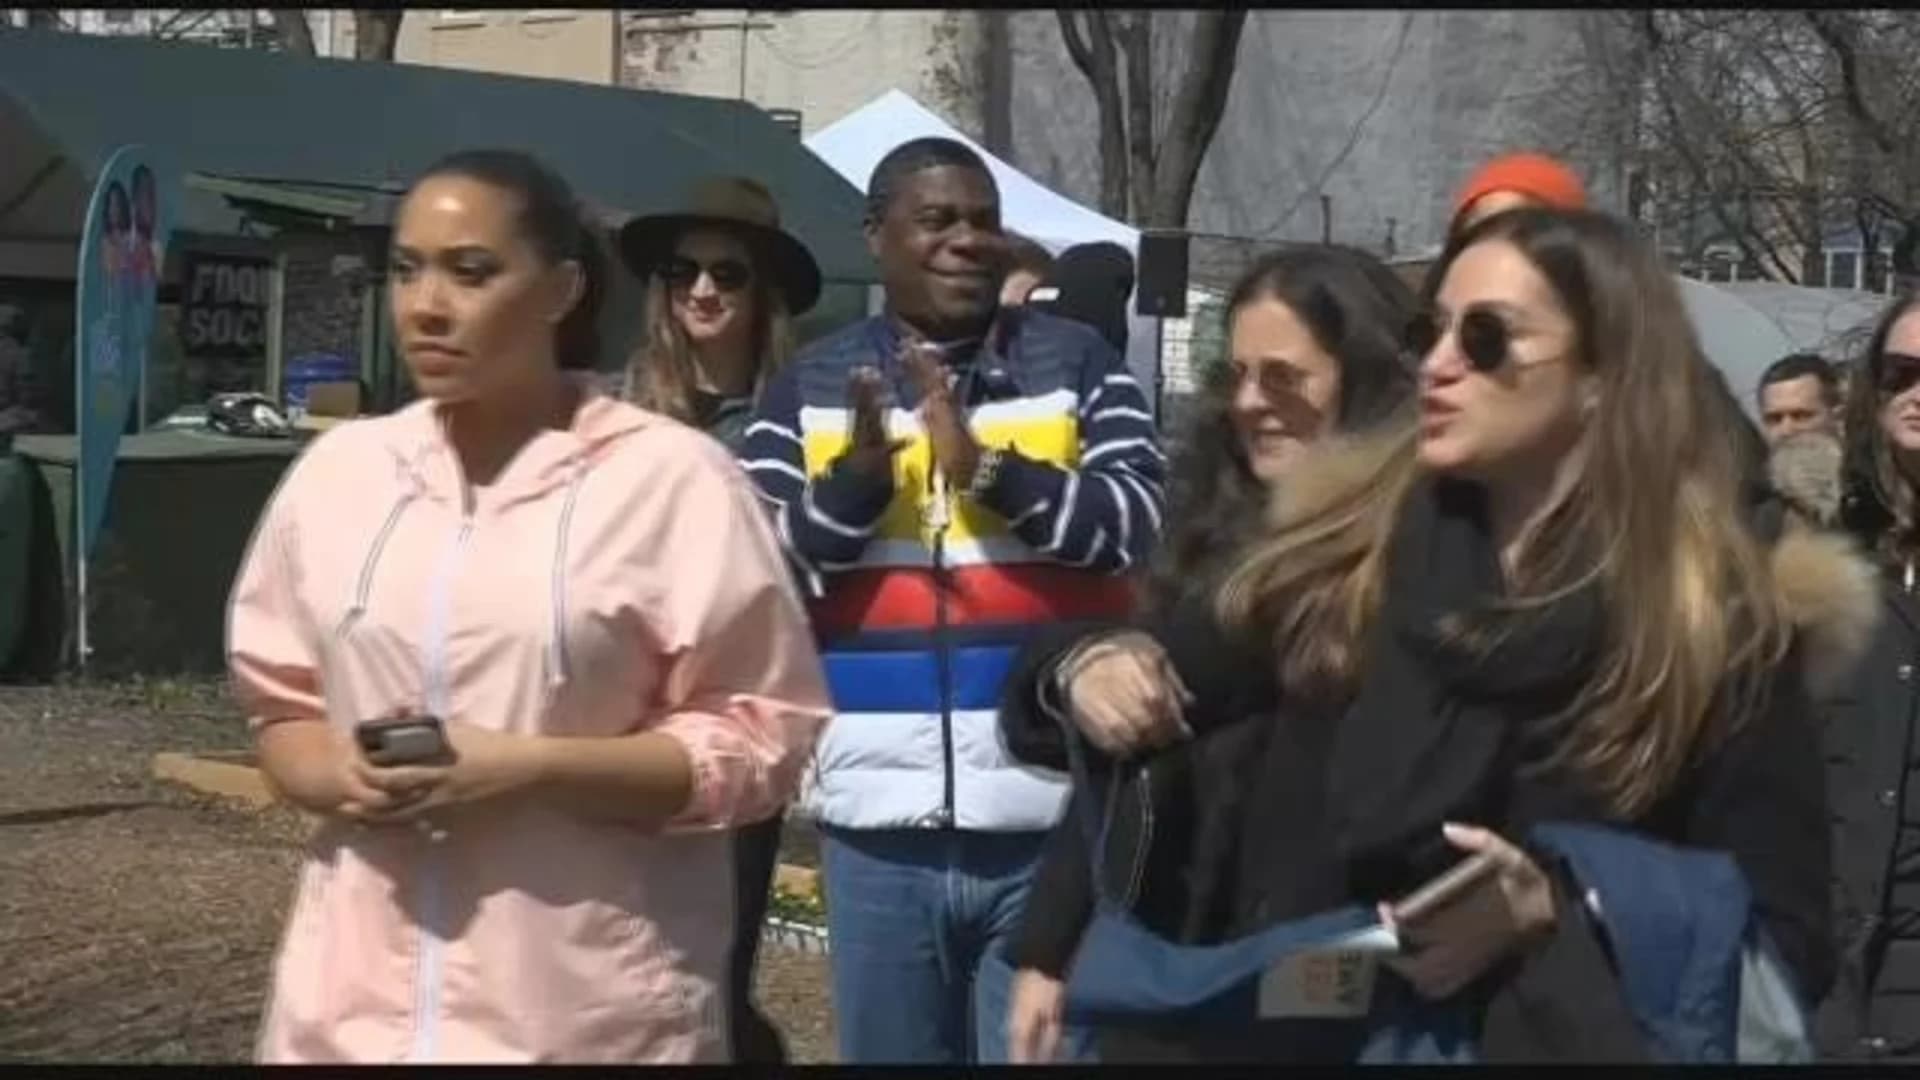 Tracy Morgan, nonprofits unveil upgrades to Bed-Stuy garden